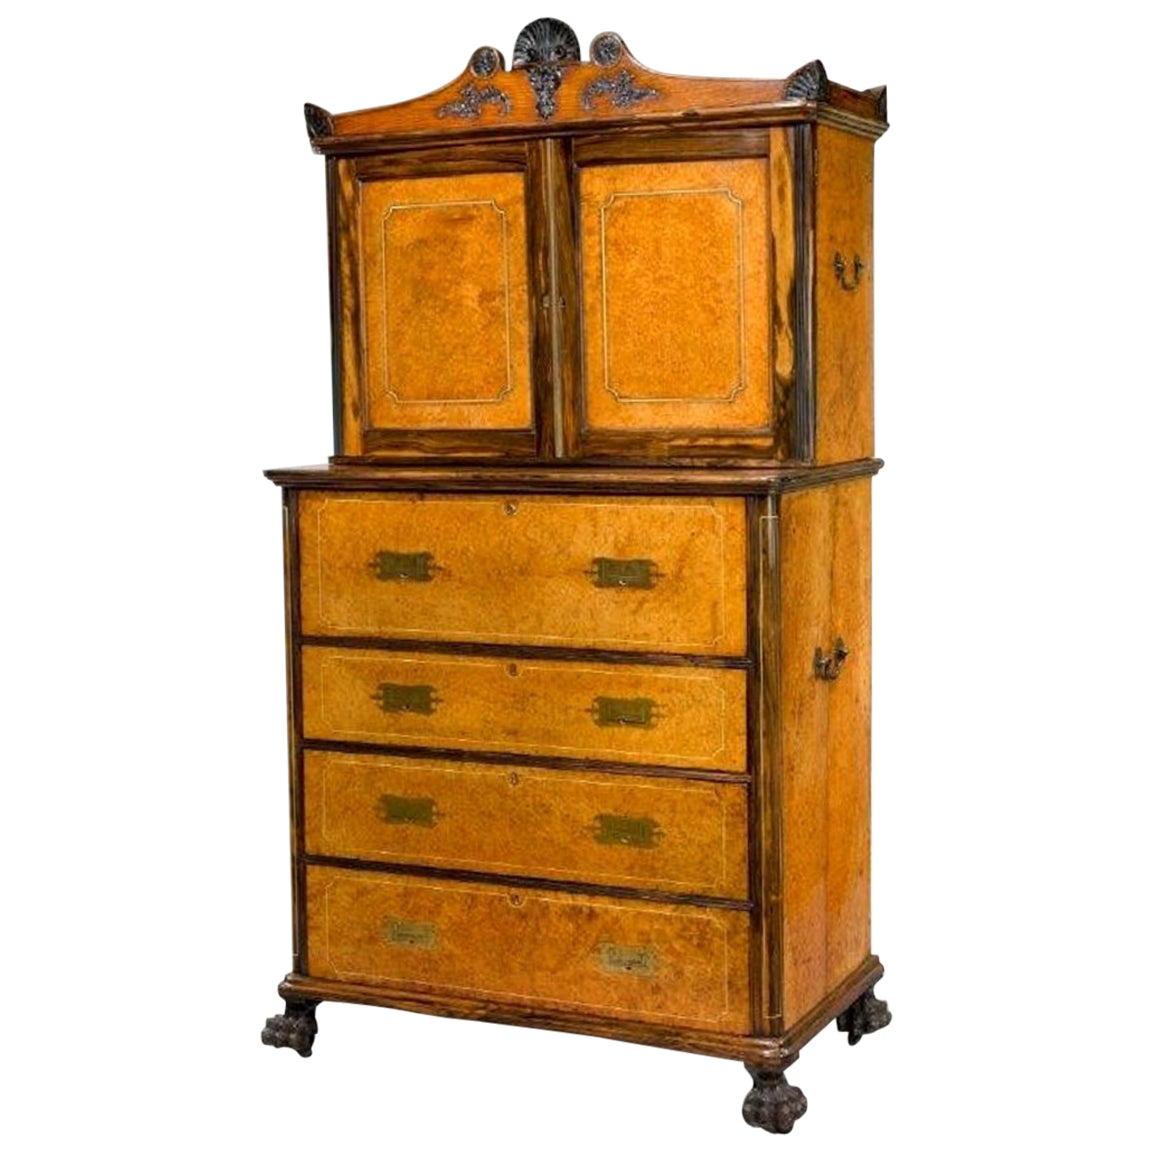 Anglo-Chinese Amboyna and Secretaire Bookcase